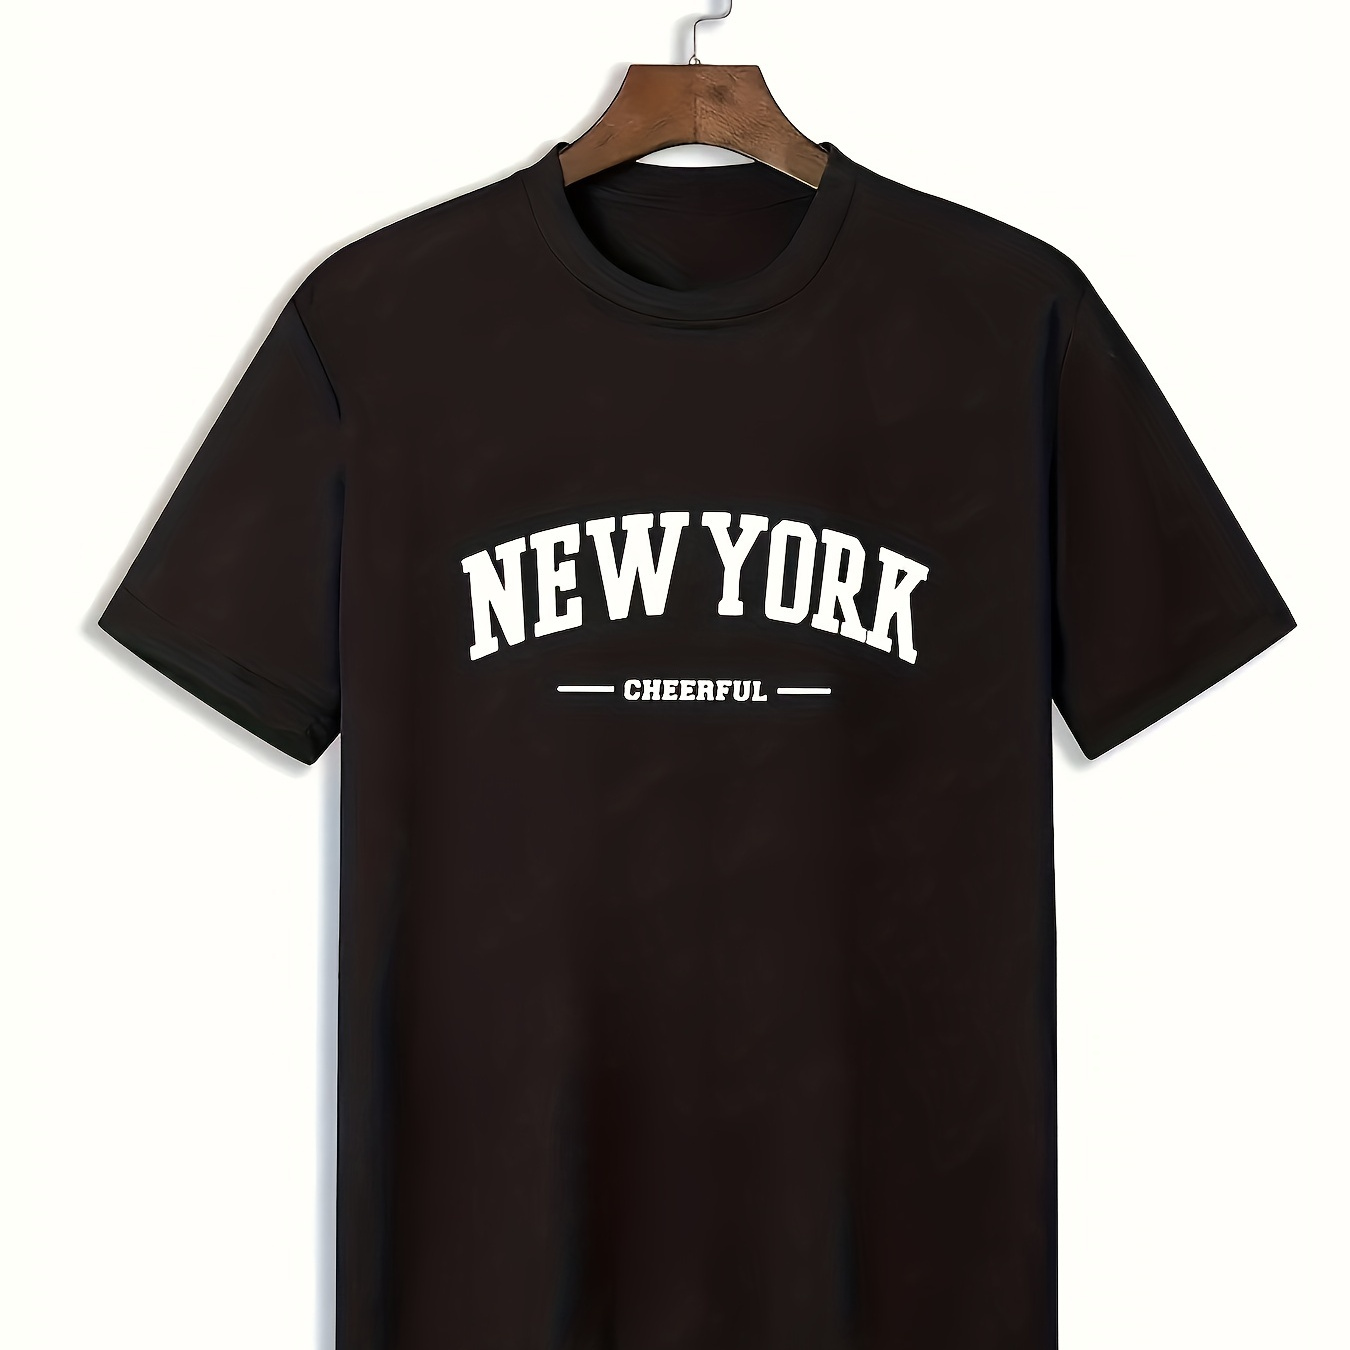 

Trendy New York Letter Print T Shirt, Tees For Kids Boys, Casual Short Sleeve T-shirt For Summer Spring Fall, Tops As Gifts